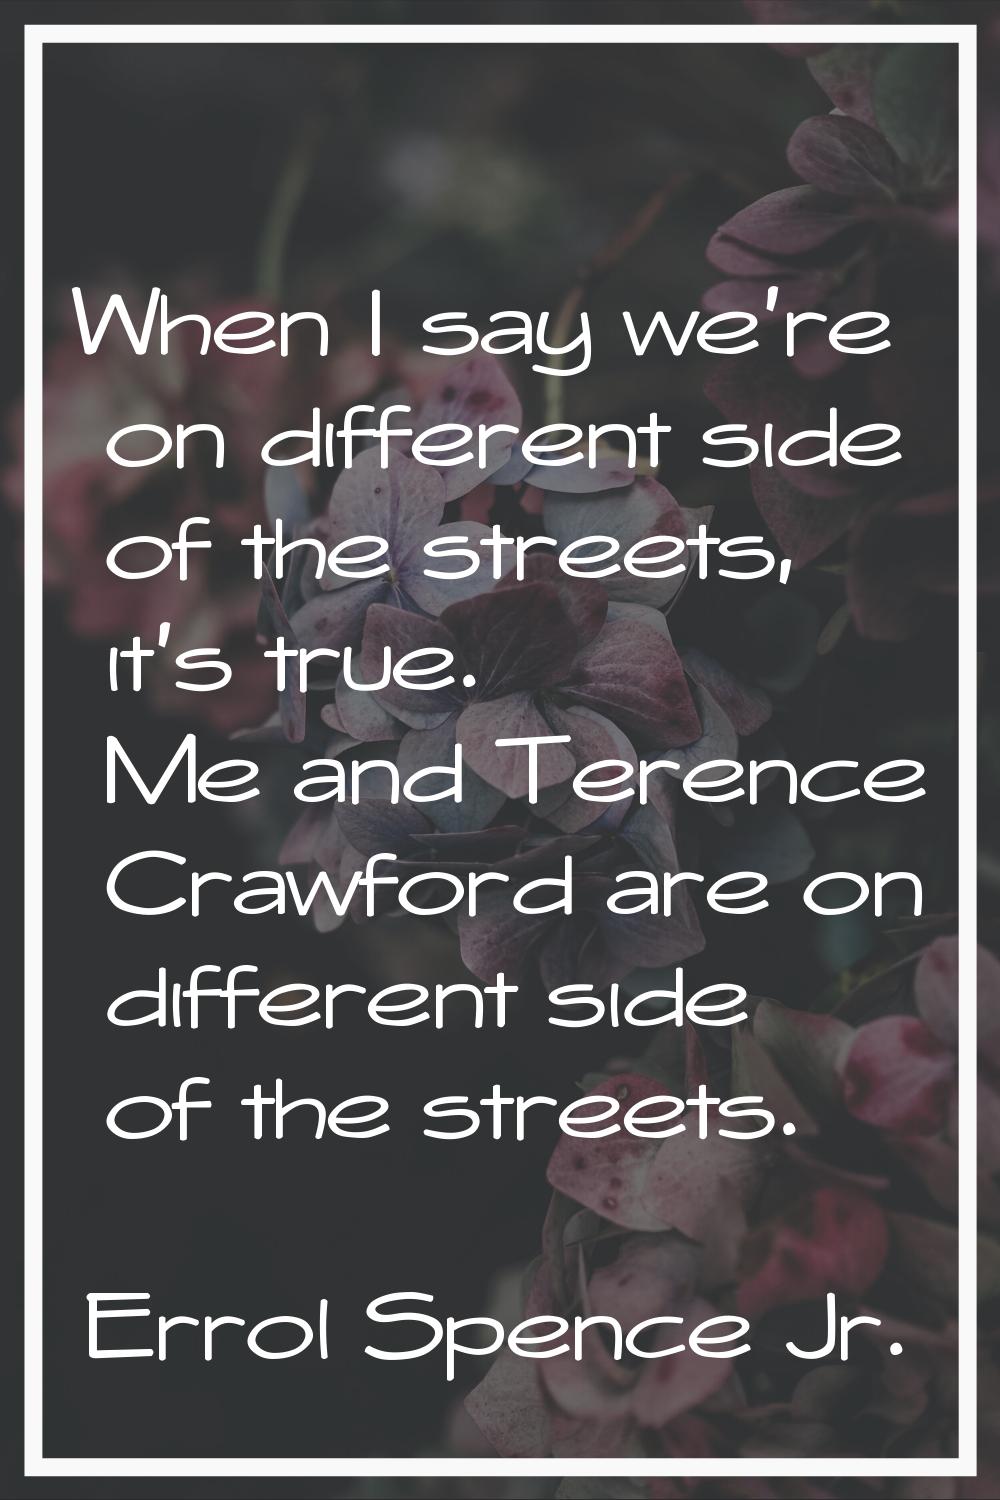 When I say we're on different side of the streets, it's true. Me and Terence Crawford are on differ